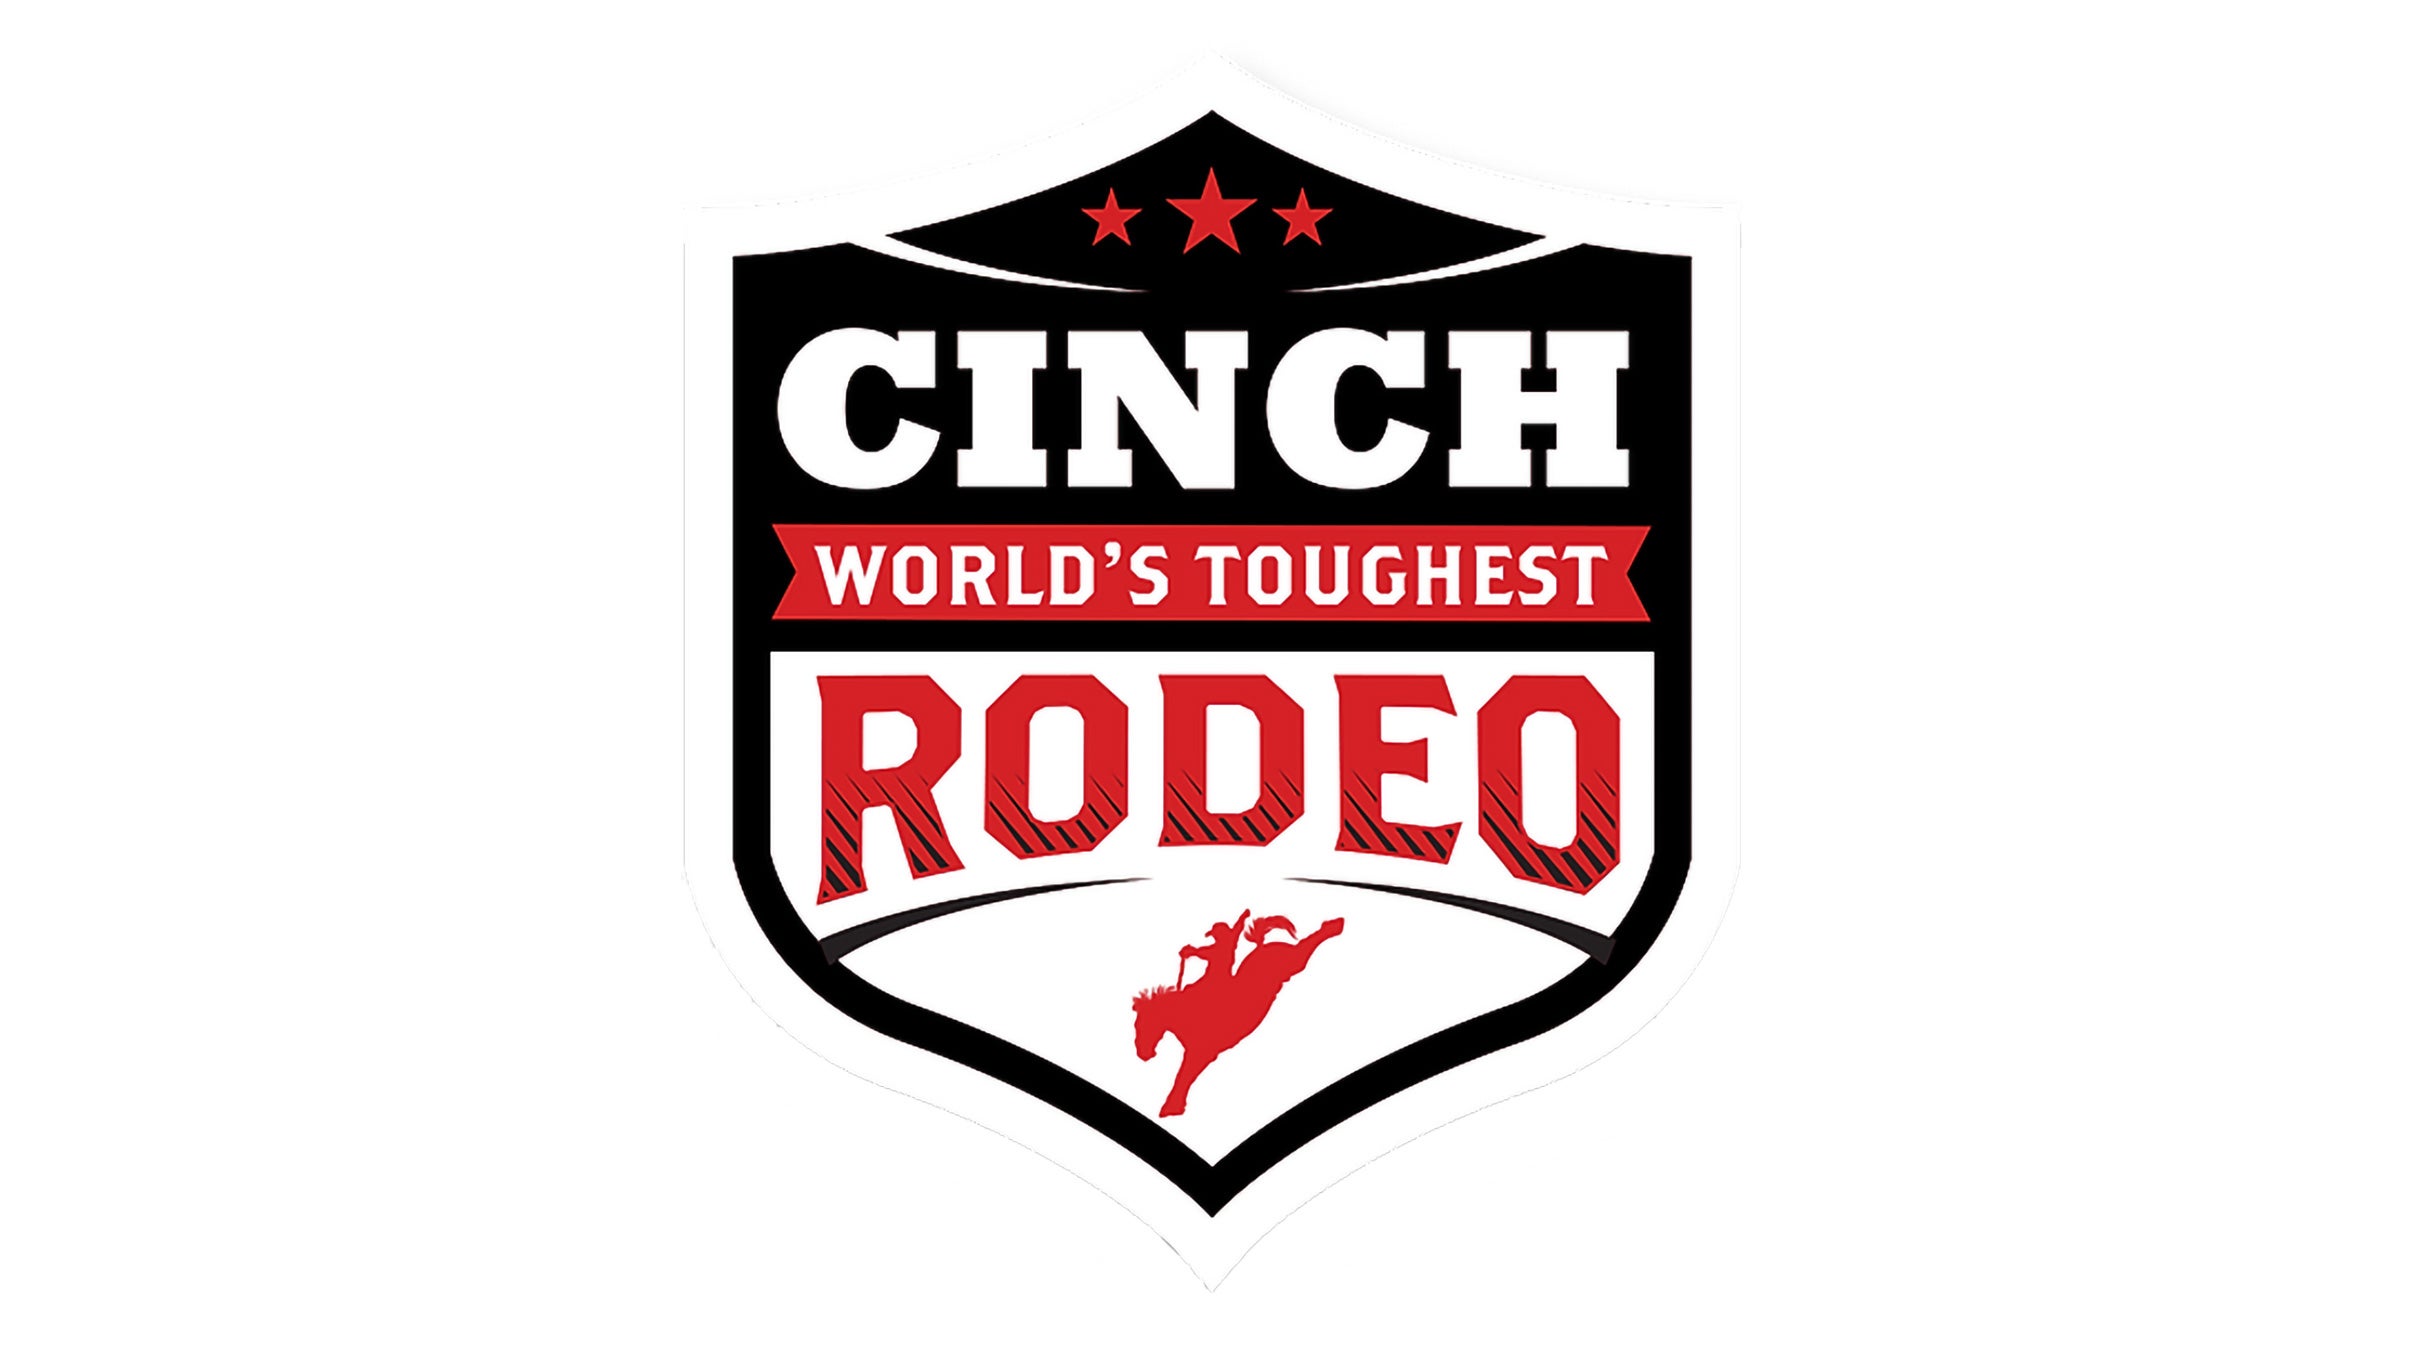 Cinch World's Toughest Rodeo at PNC Arena